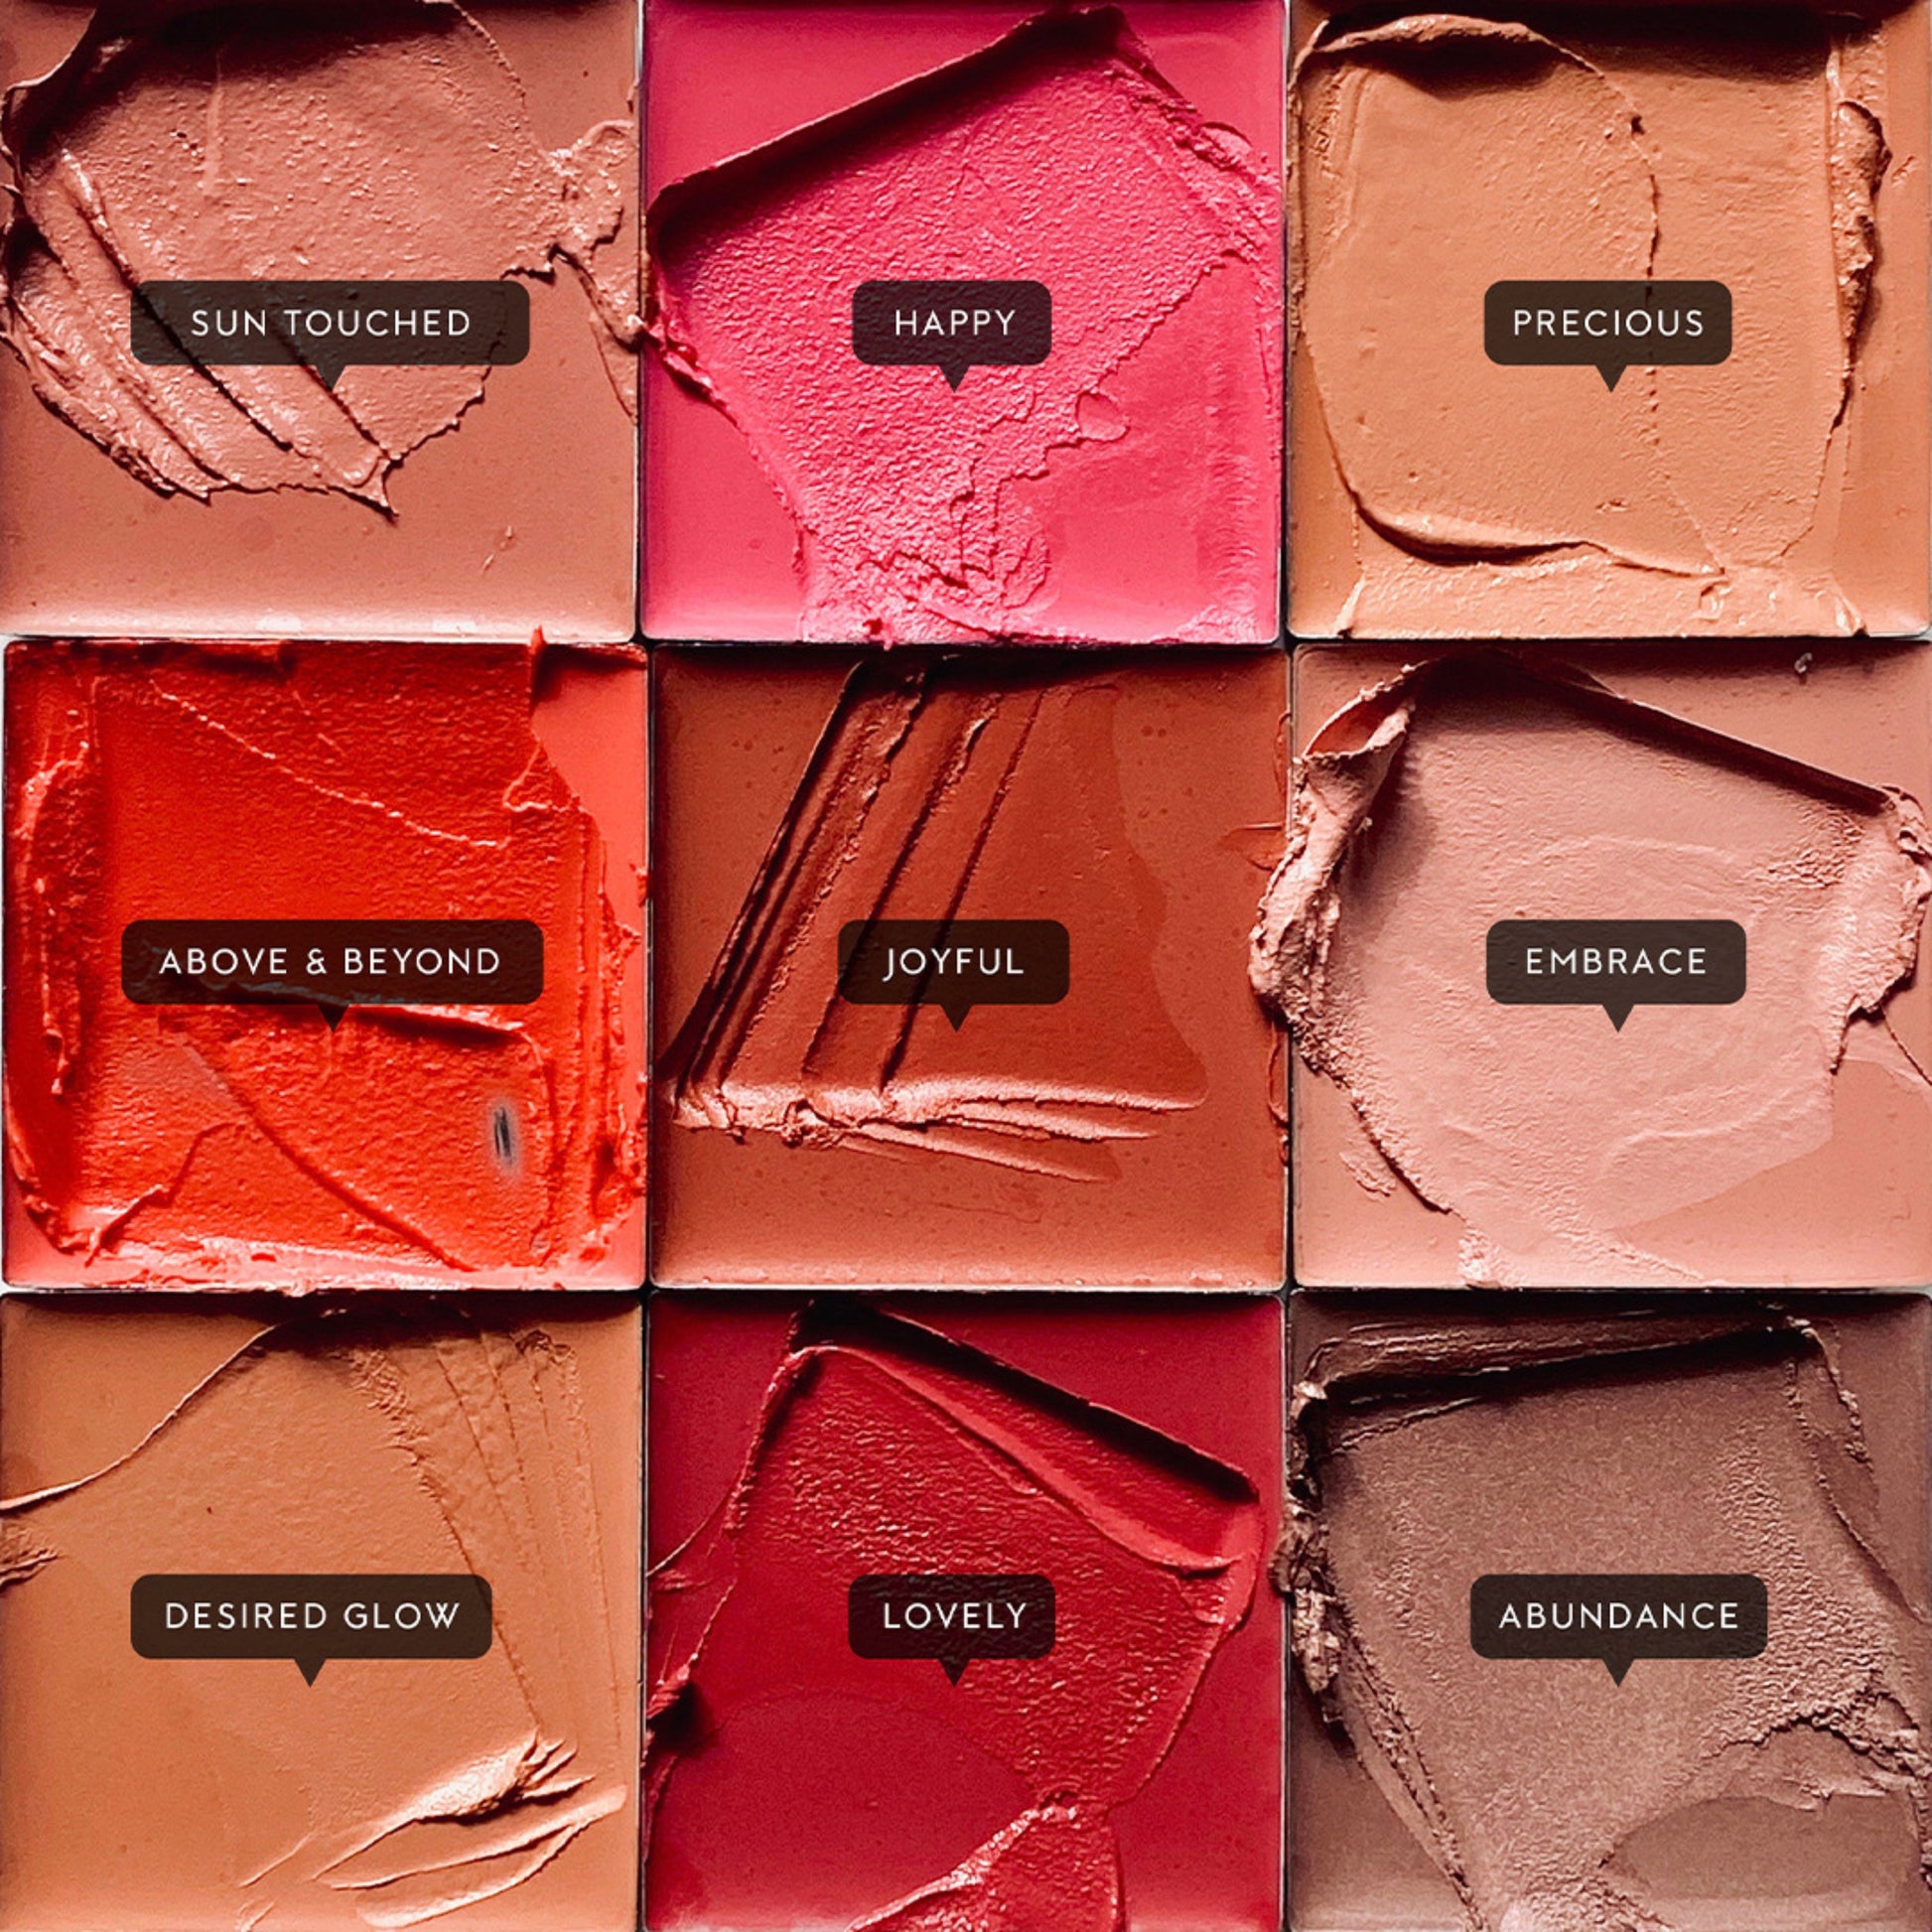 nine different shades of cream blush. embrace is a nude pink shade.   